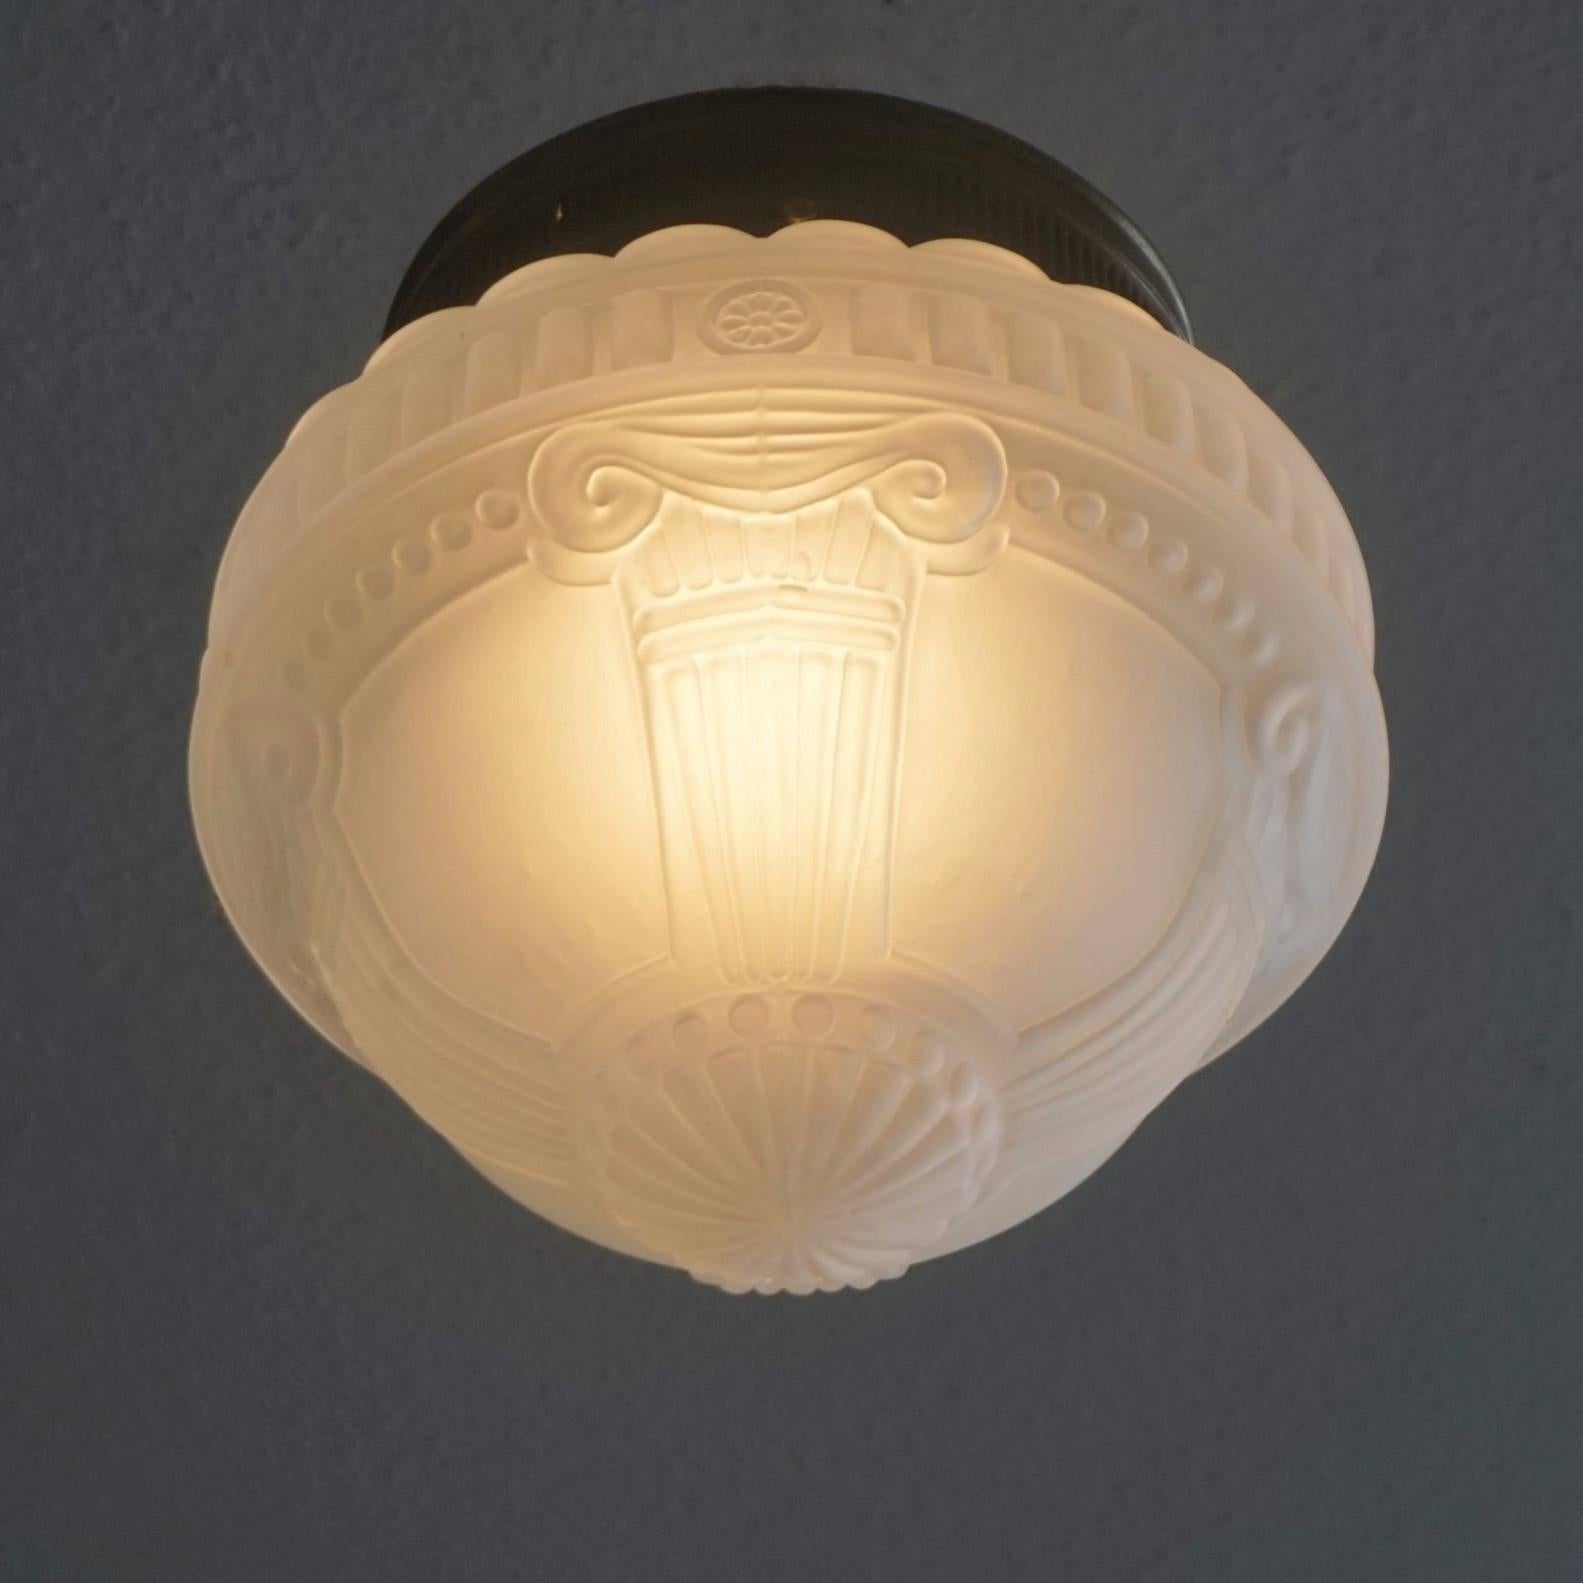 French Art Deco Frosted High Relief Glass Two-Light Ceiling Light Fixture, 1930s For Sale 5